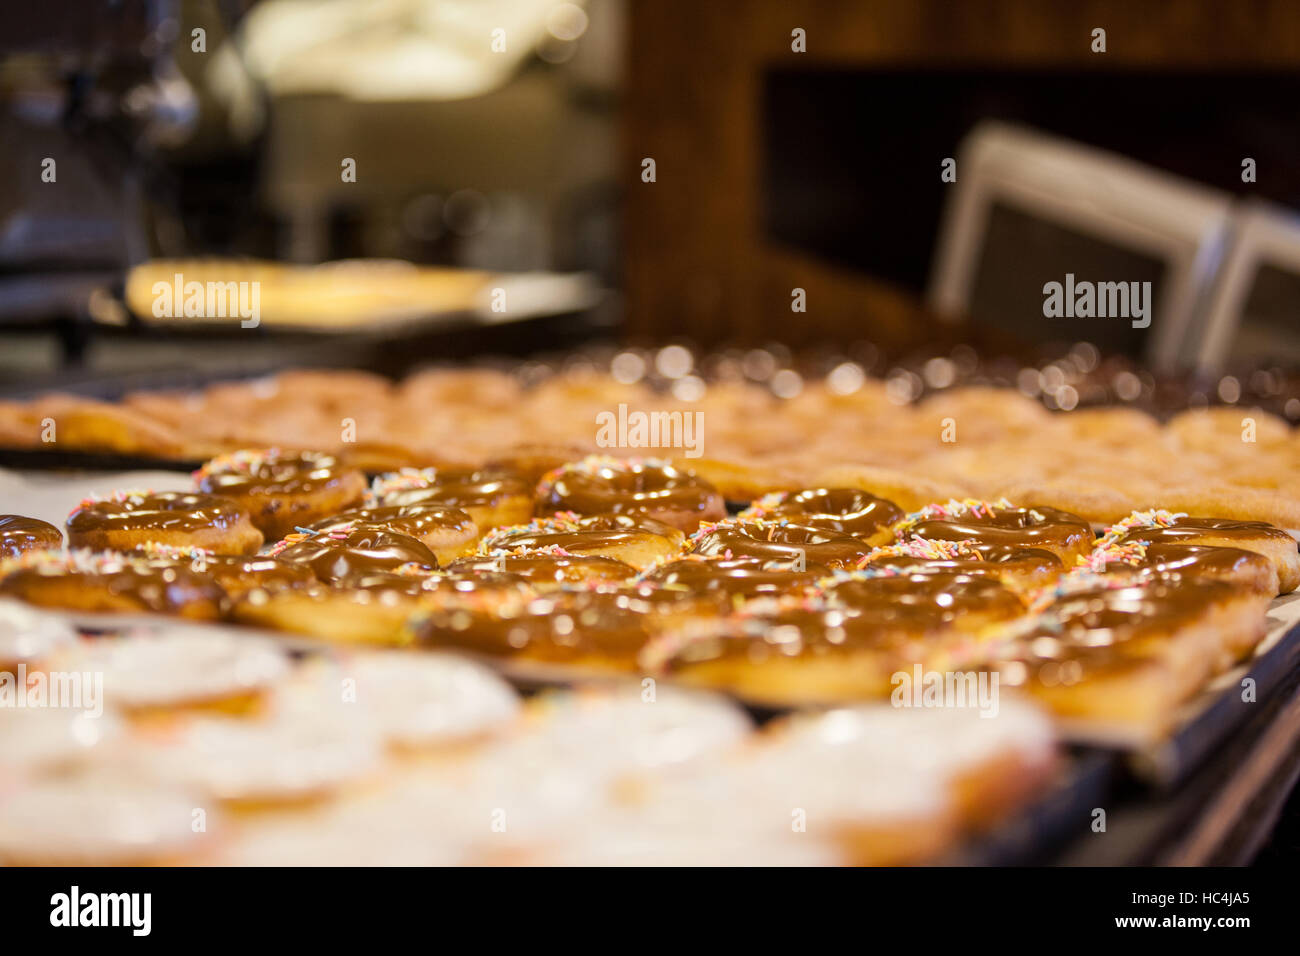 Close-up of doughnut in display Stock Photo